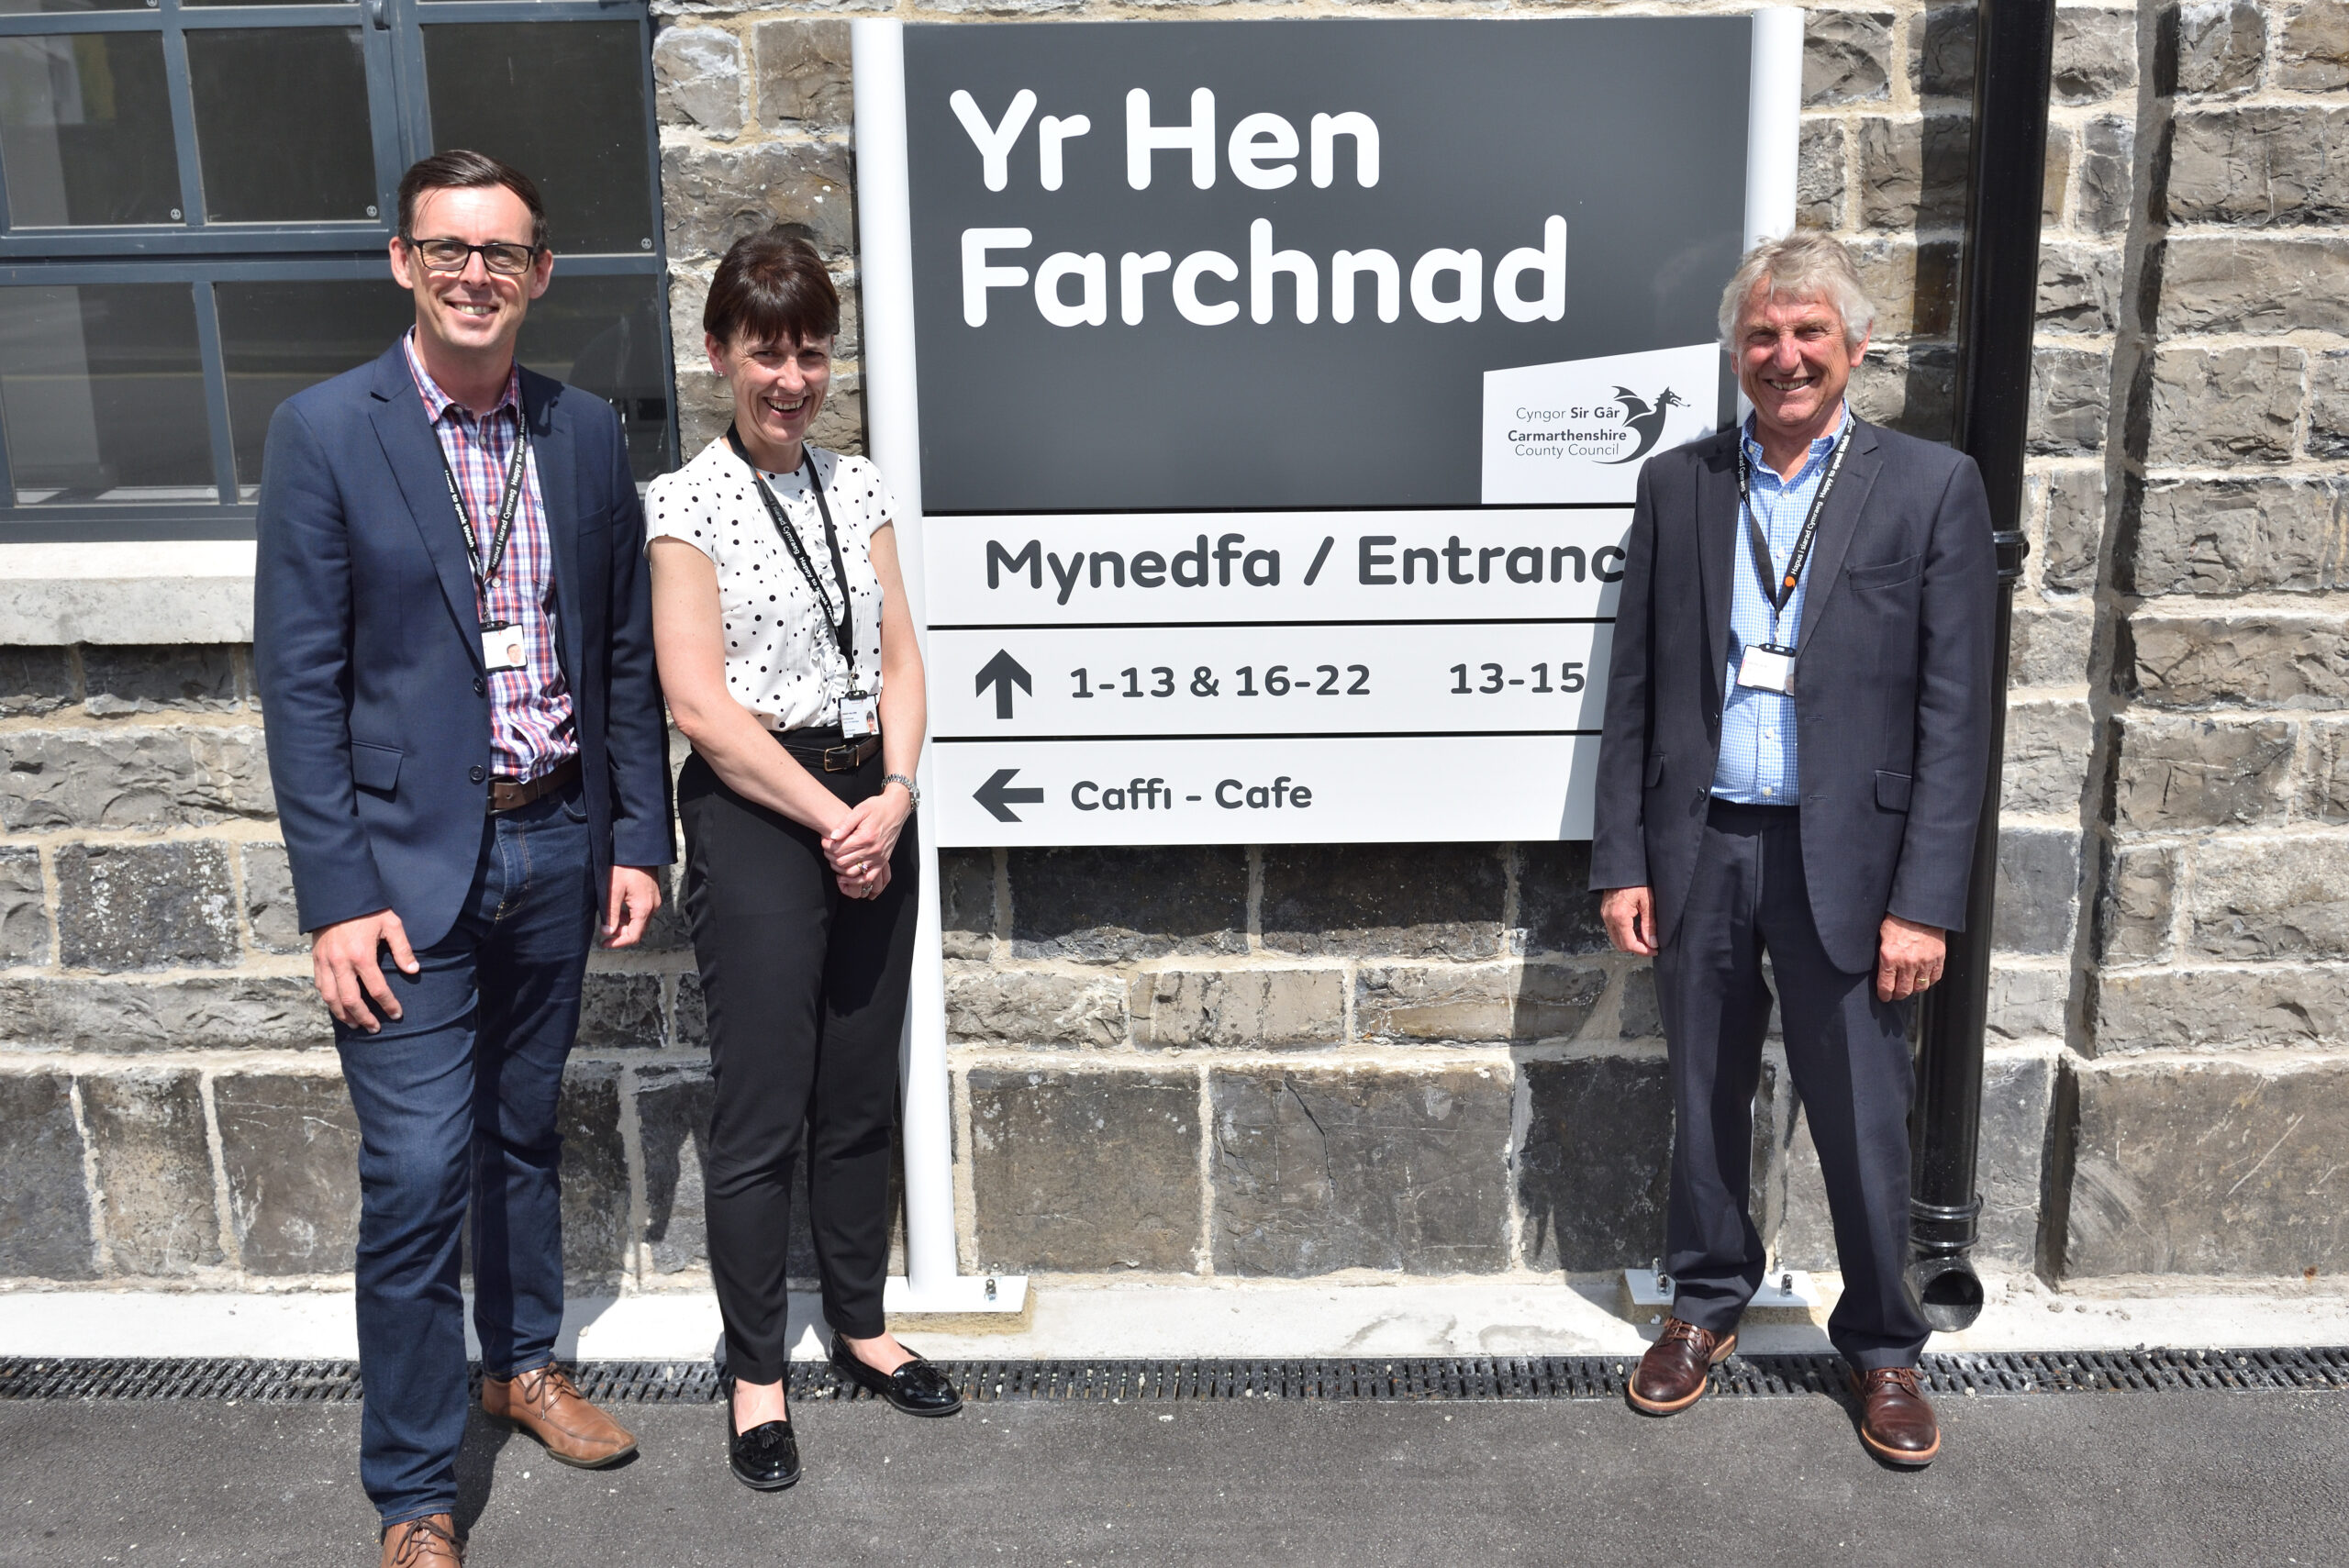 Yr Hen Farchnad – The Old Market in Llandeilo officially reopened